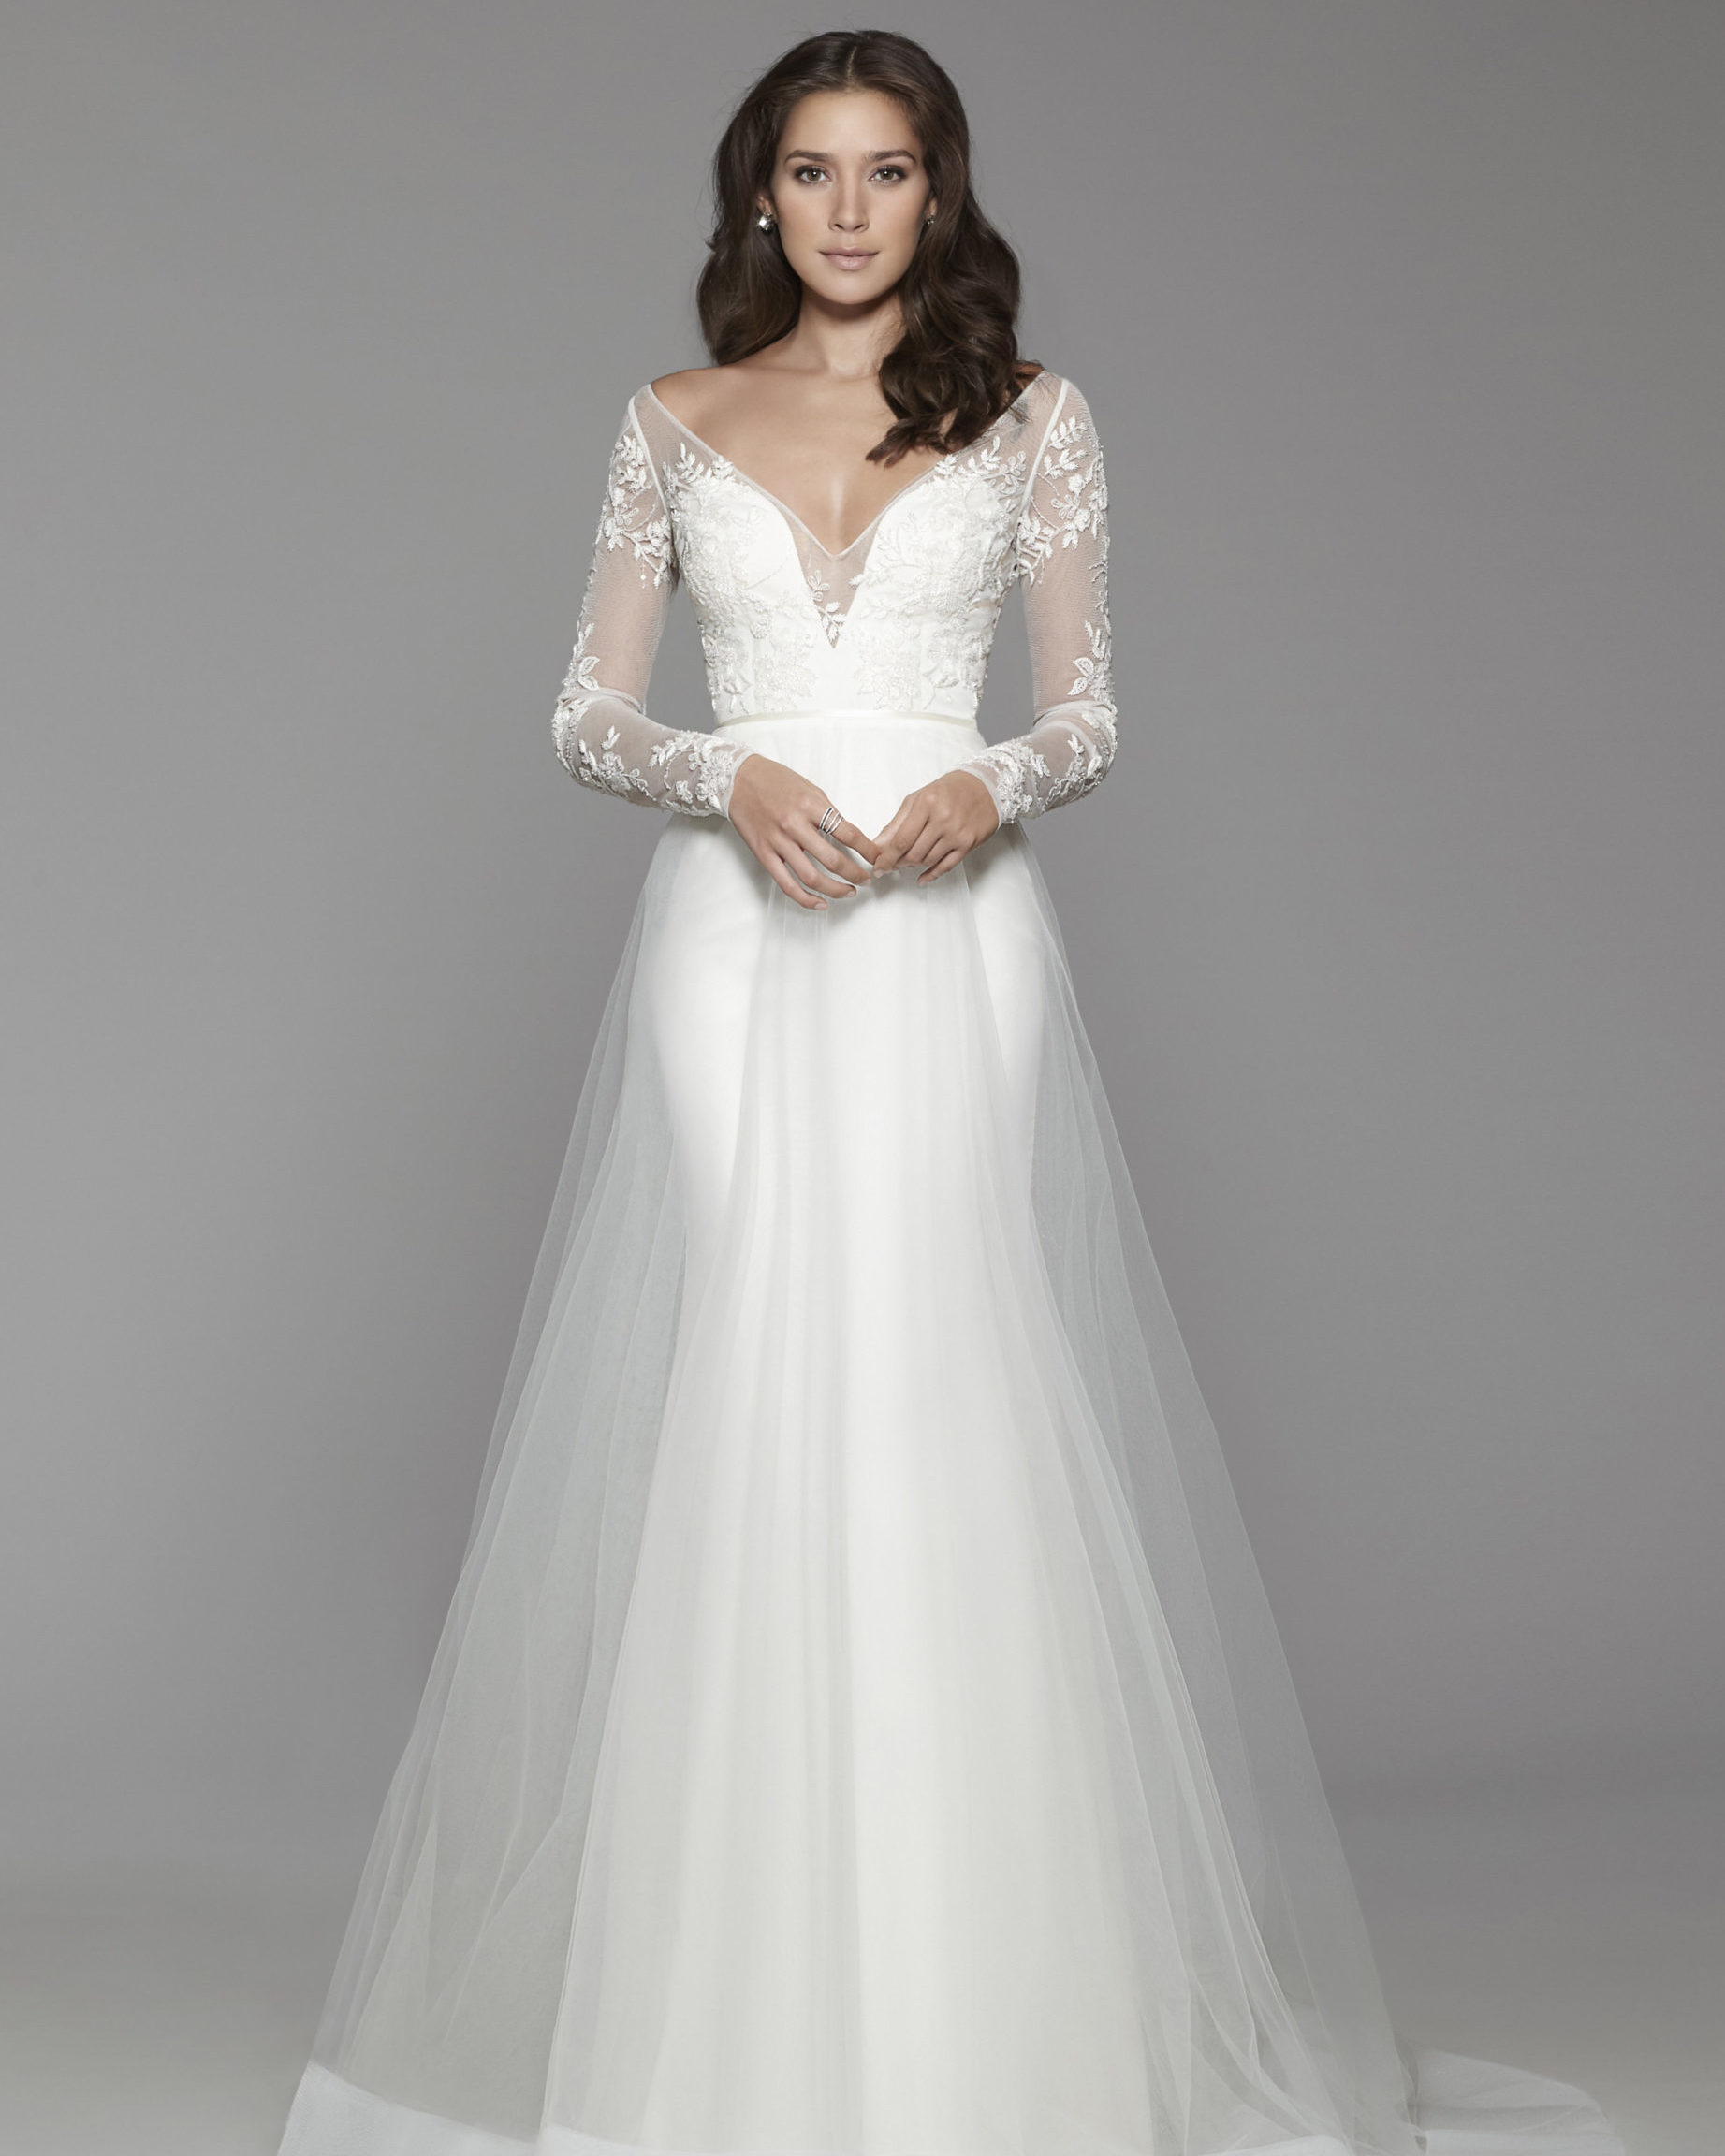 Introducing our wedding dress designer outlet of Sale dresses at Hannah Elizabeth. Click to view all available wedding gowns here.